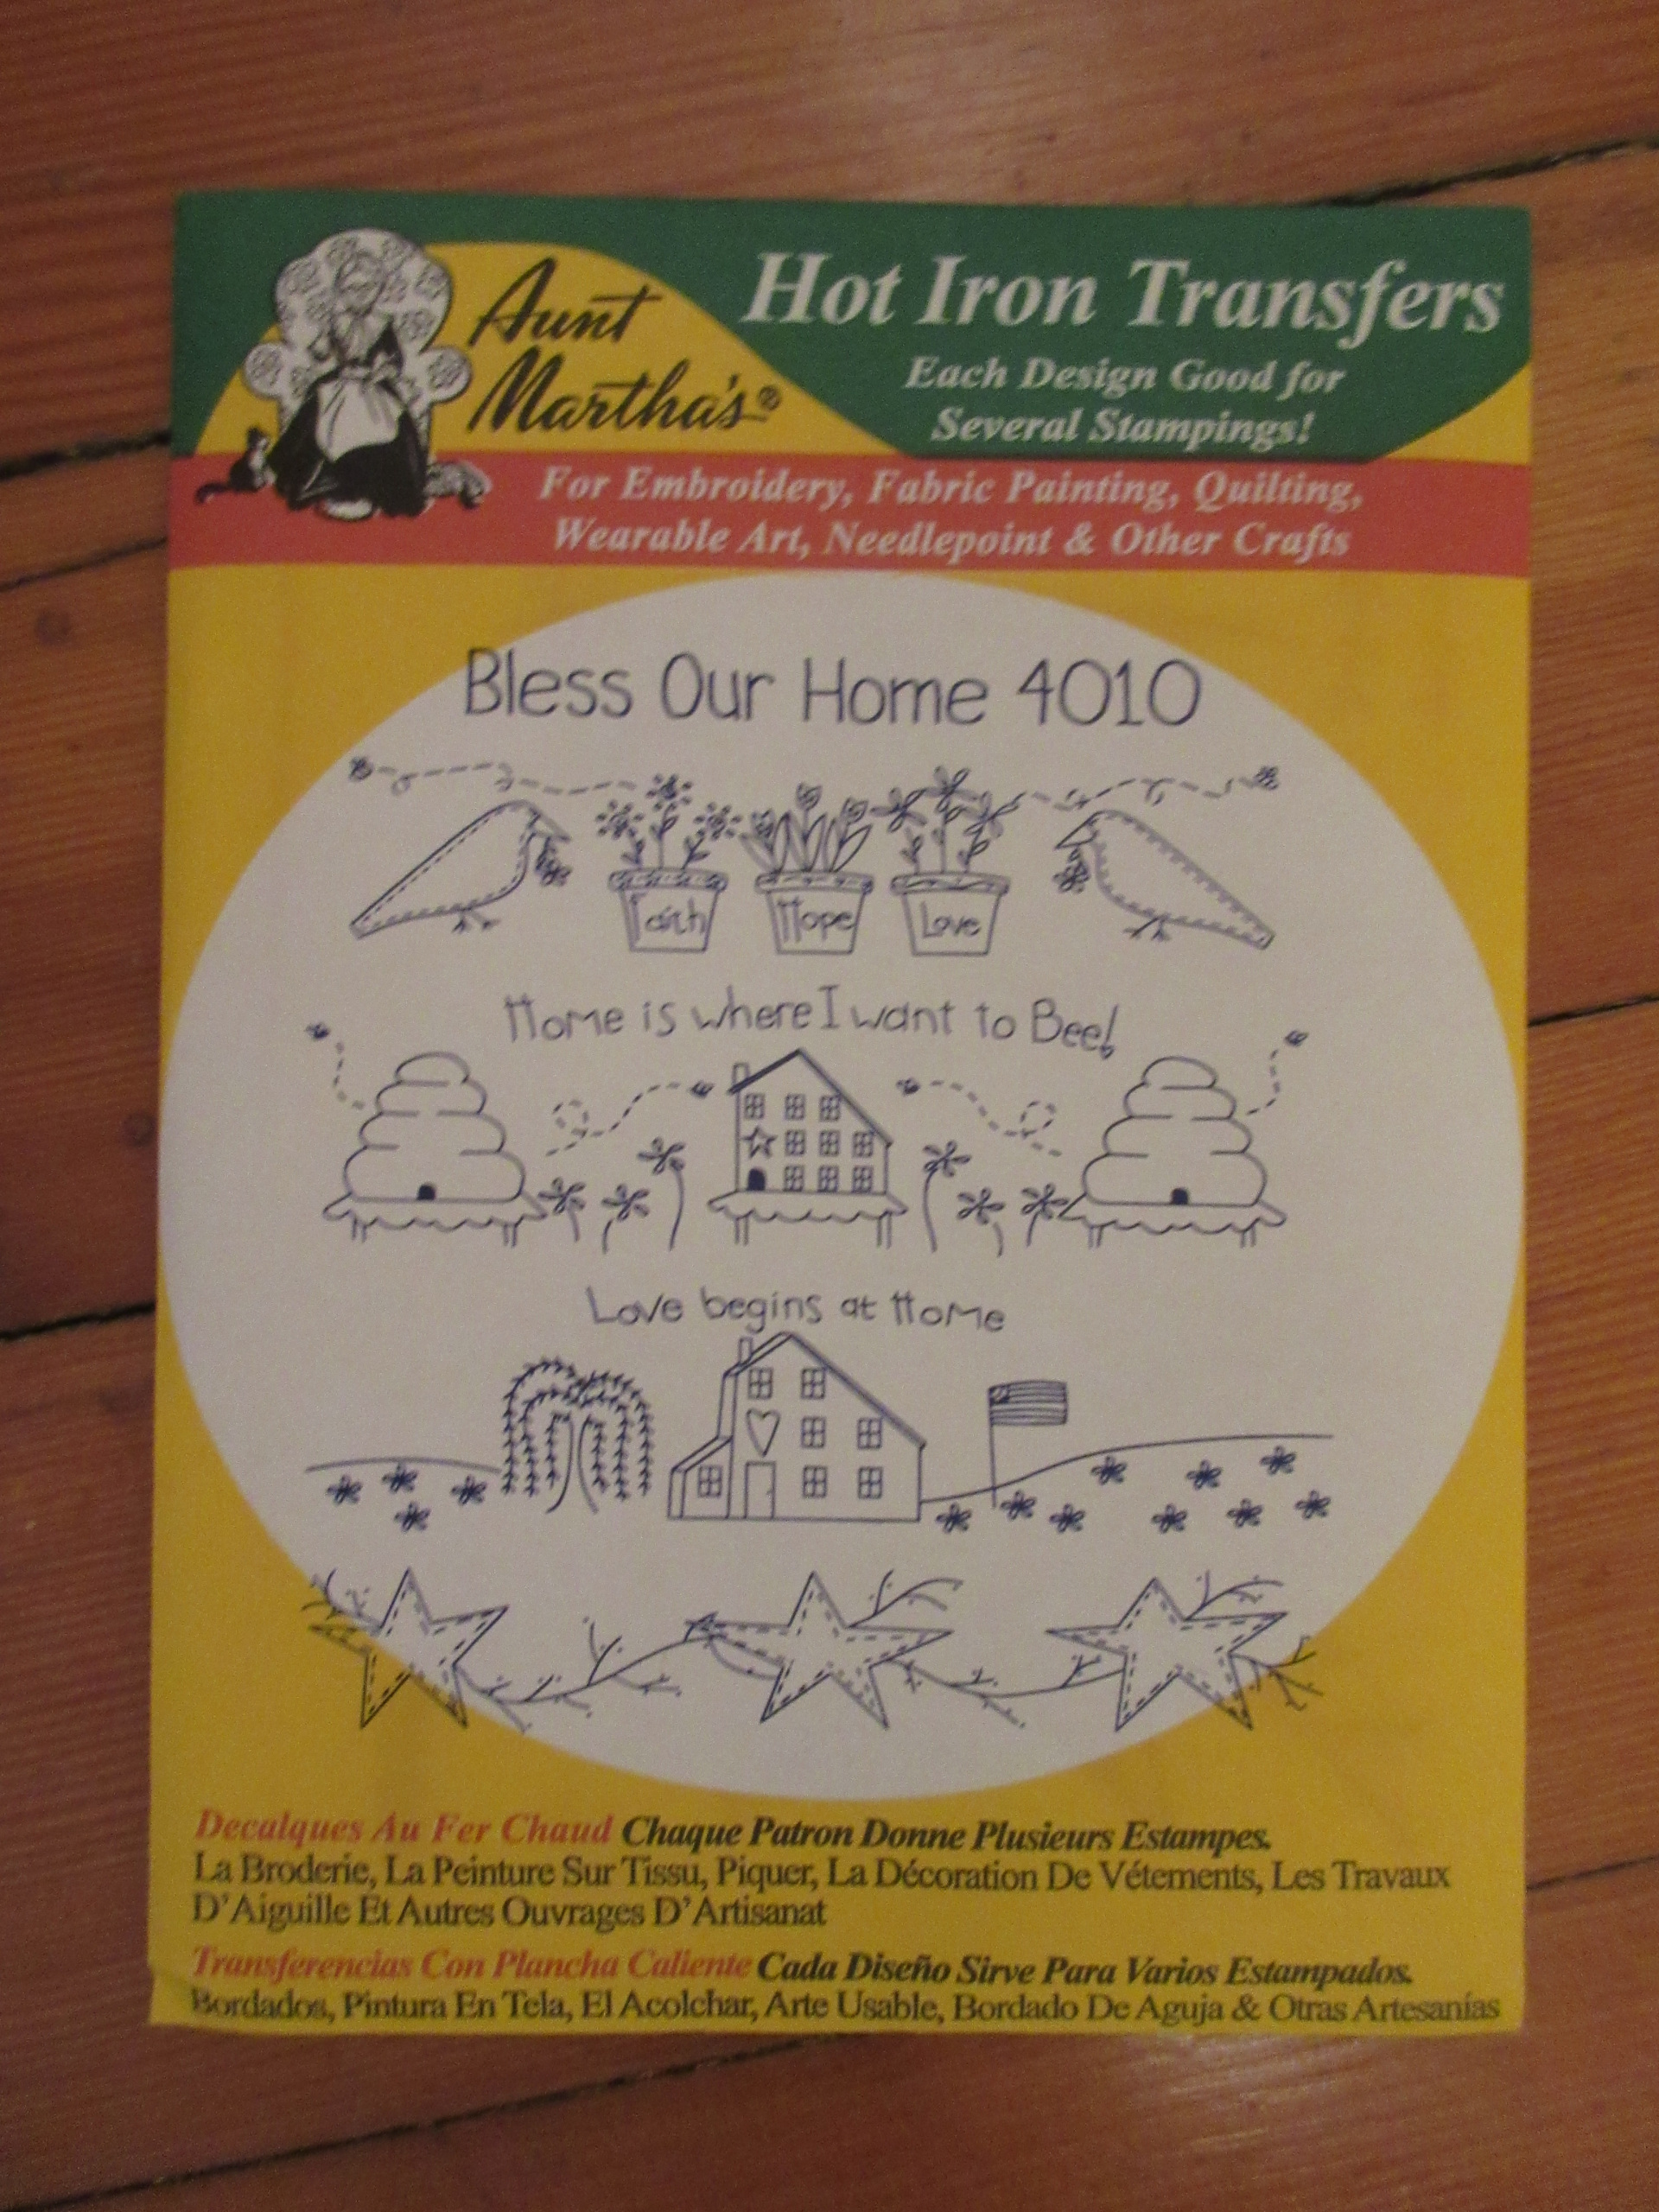 Brand New! Aunt Martha's Hot Iron Transfers Bless our Home Embroidery  Crafts - Made in USA